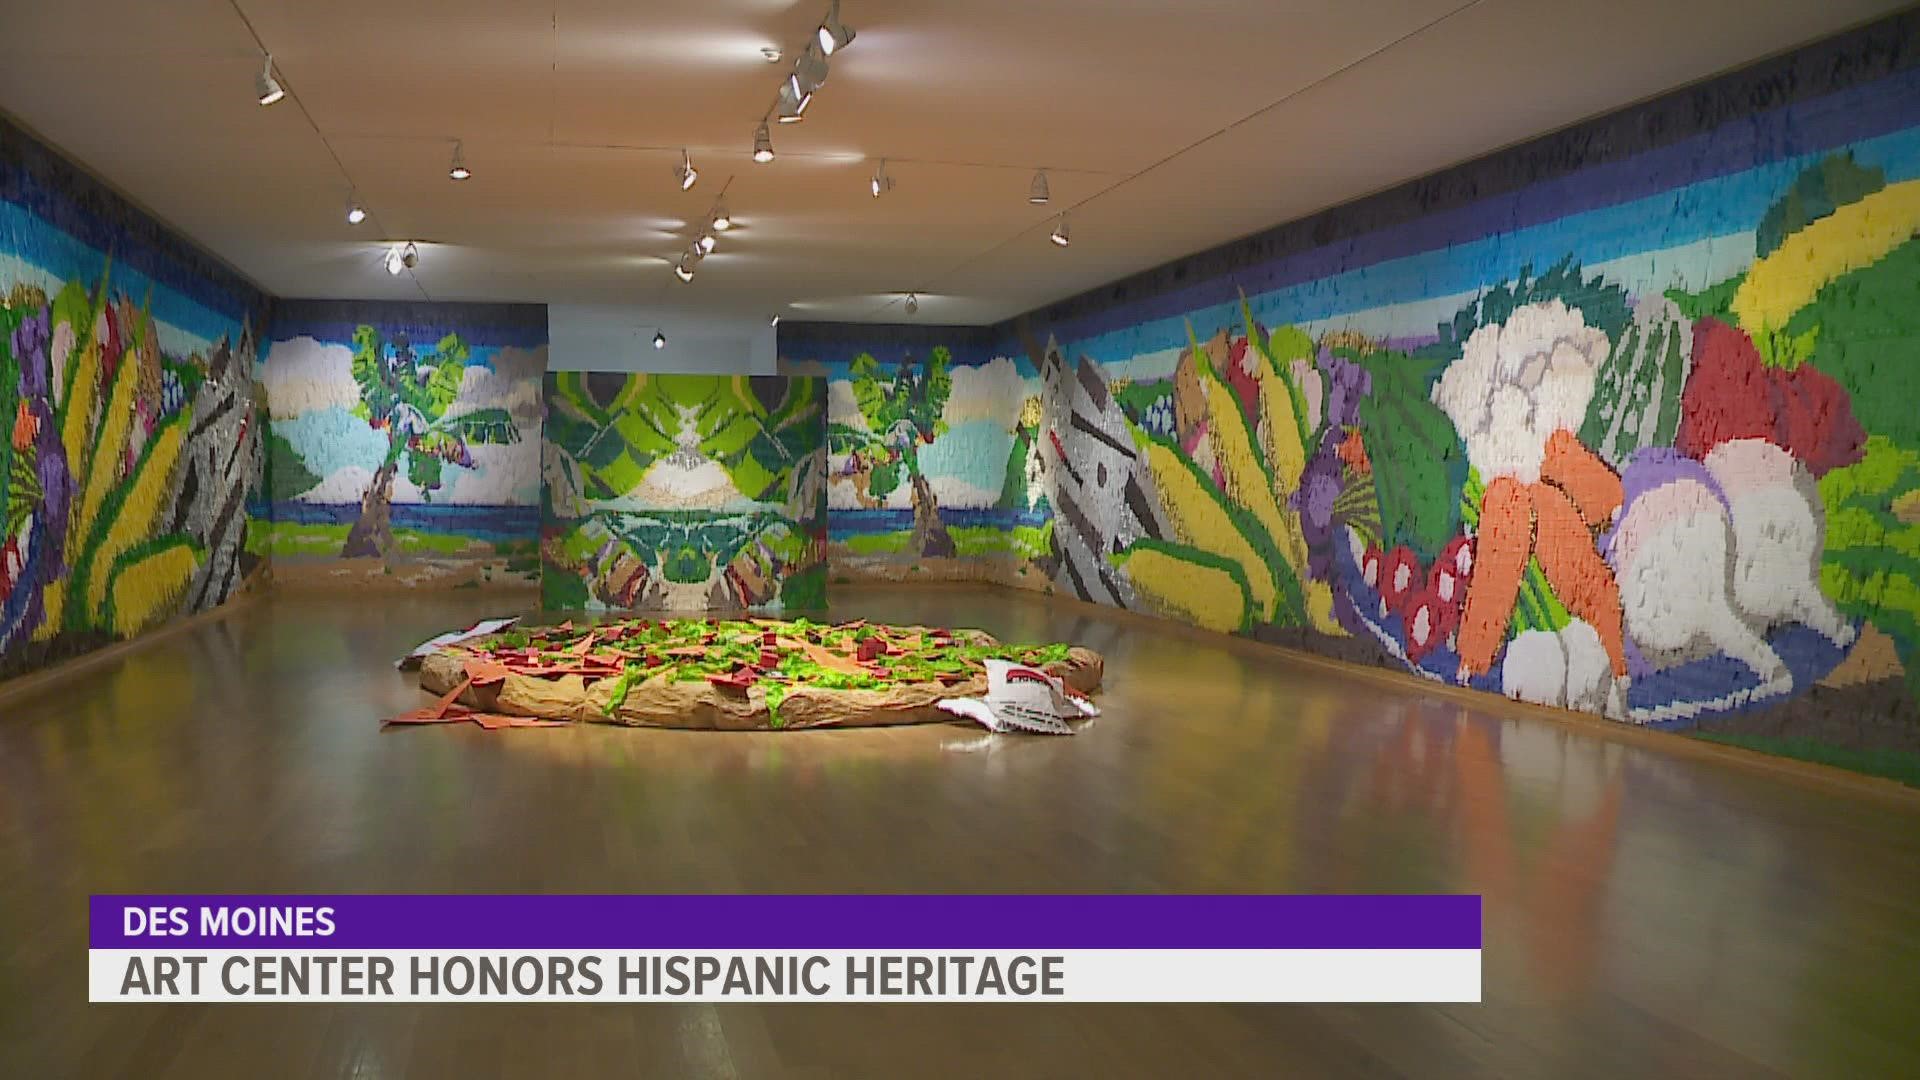 The featured exhibition titled "Central American" is on display through Jan. 23, 2022.